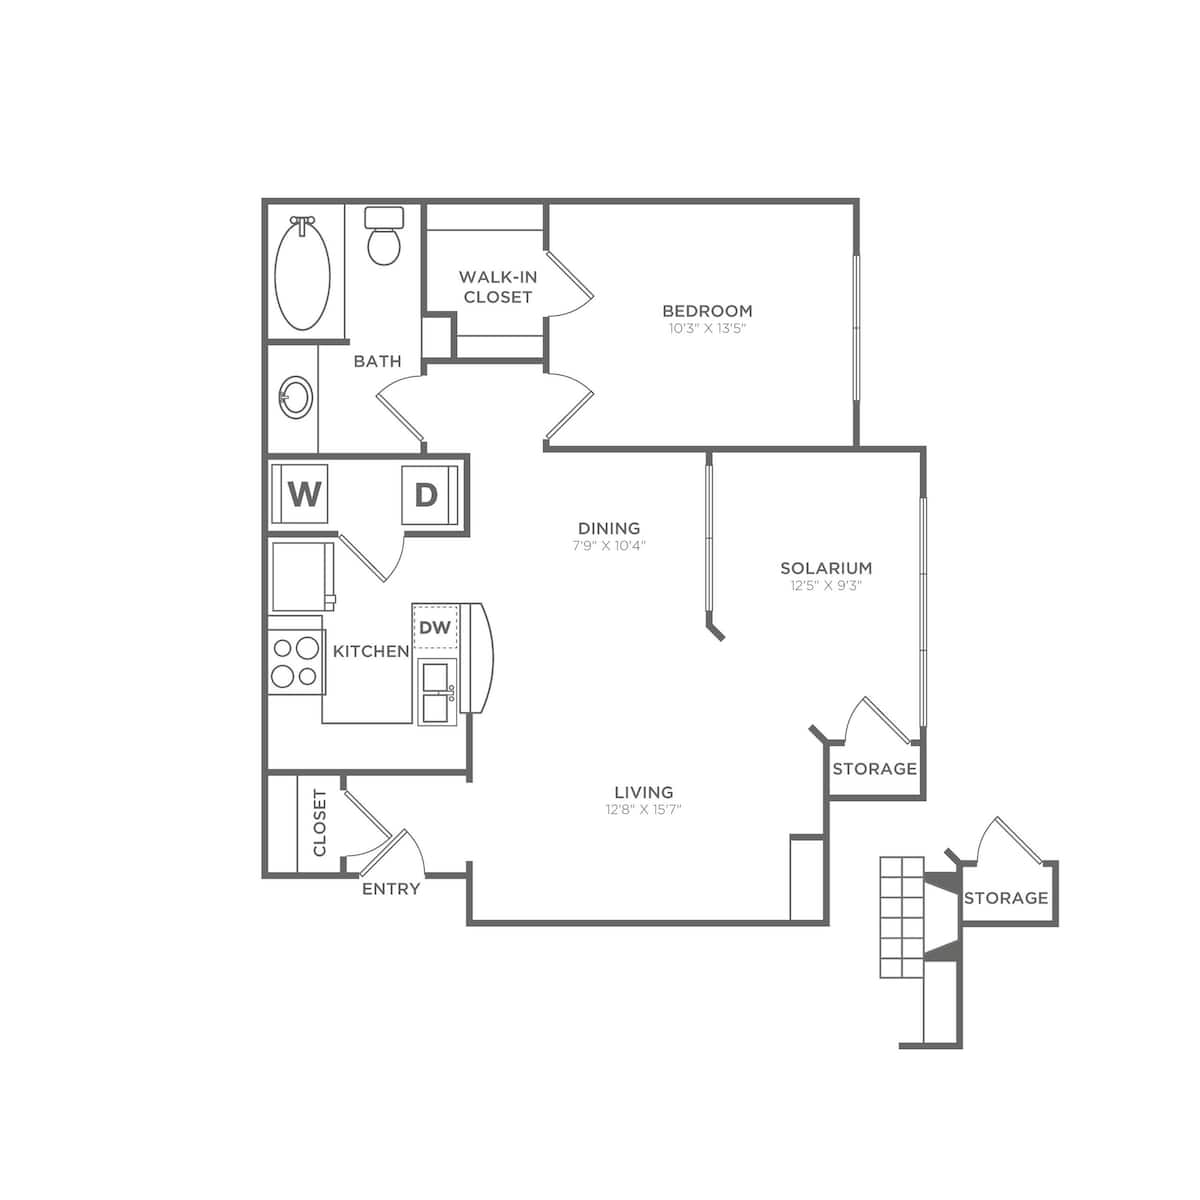 Floorplan diagram for A1s-Tailored, showing 1 bedroom